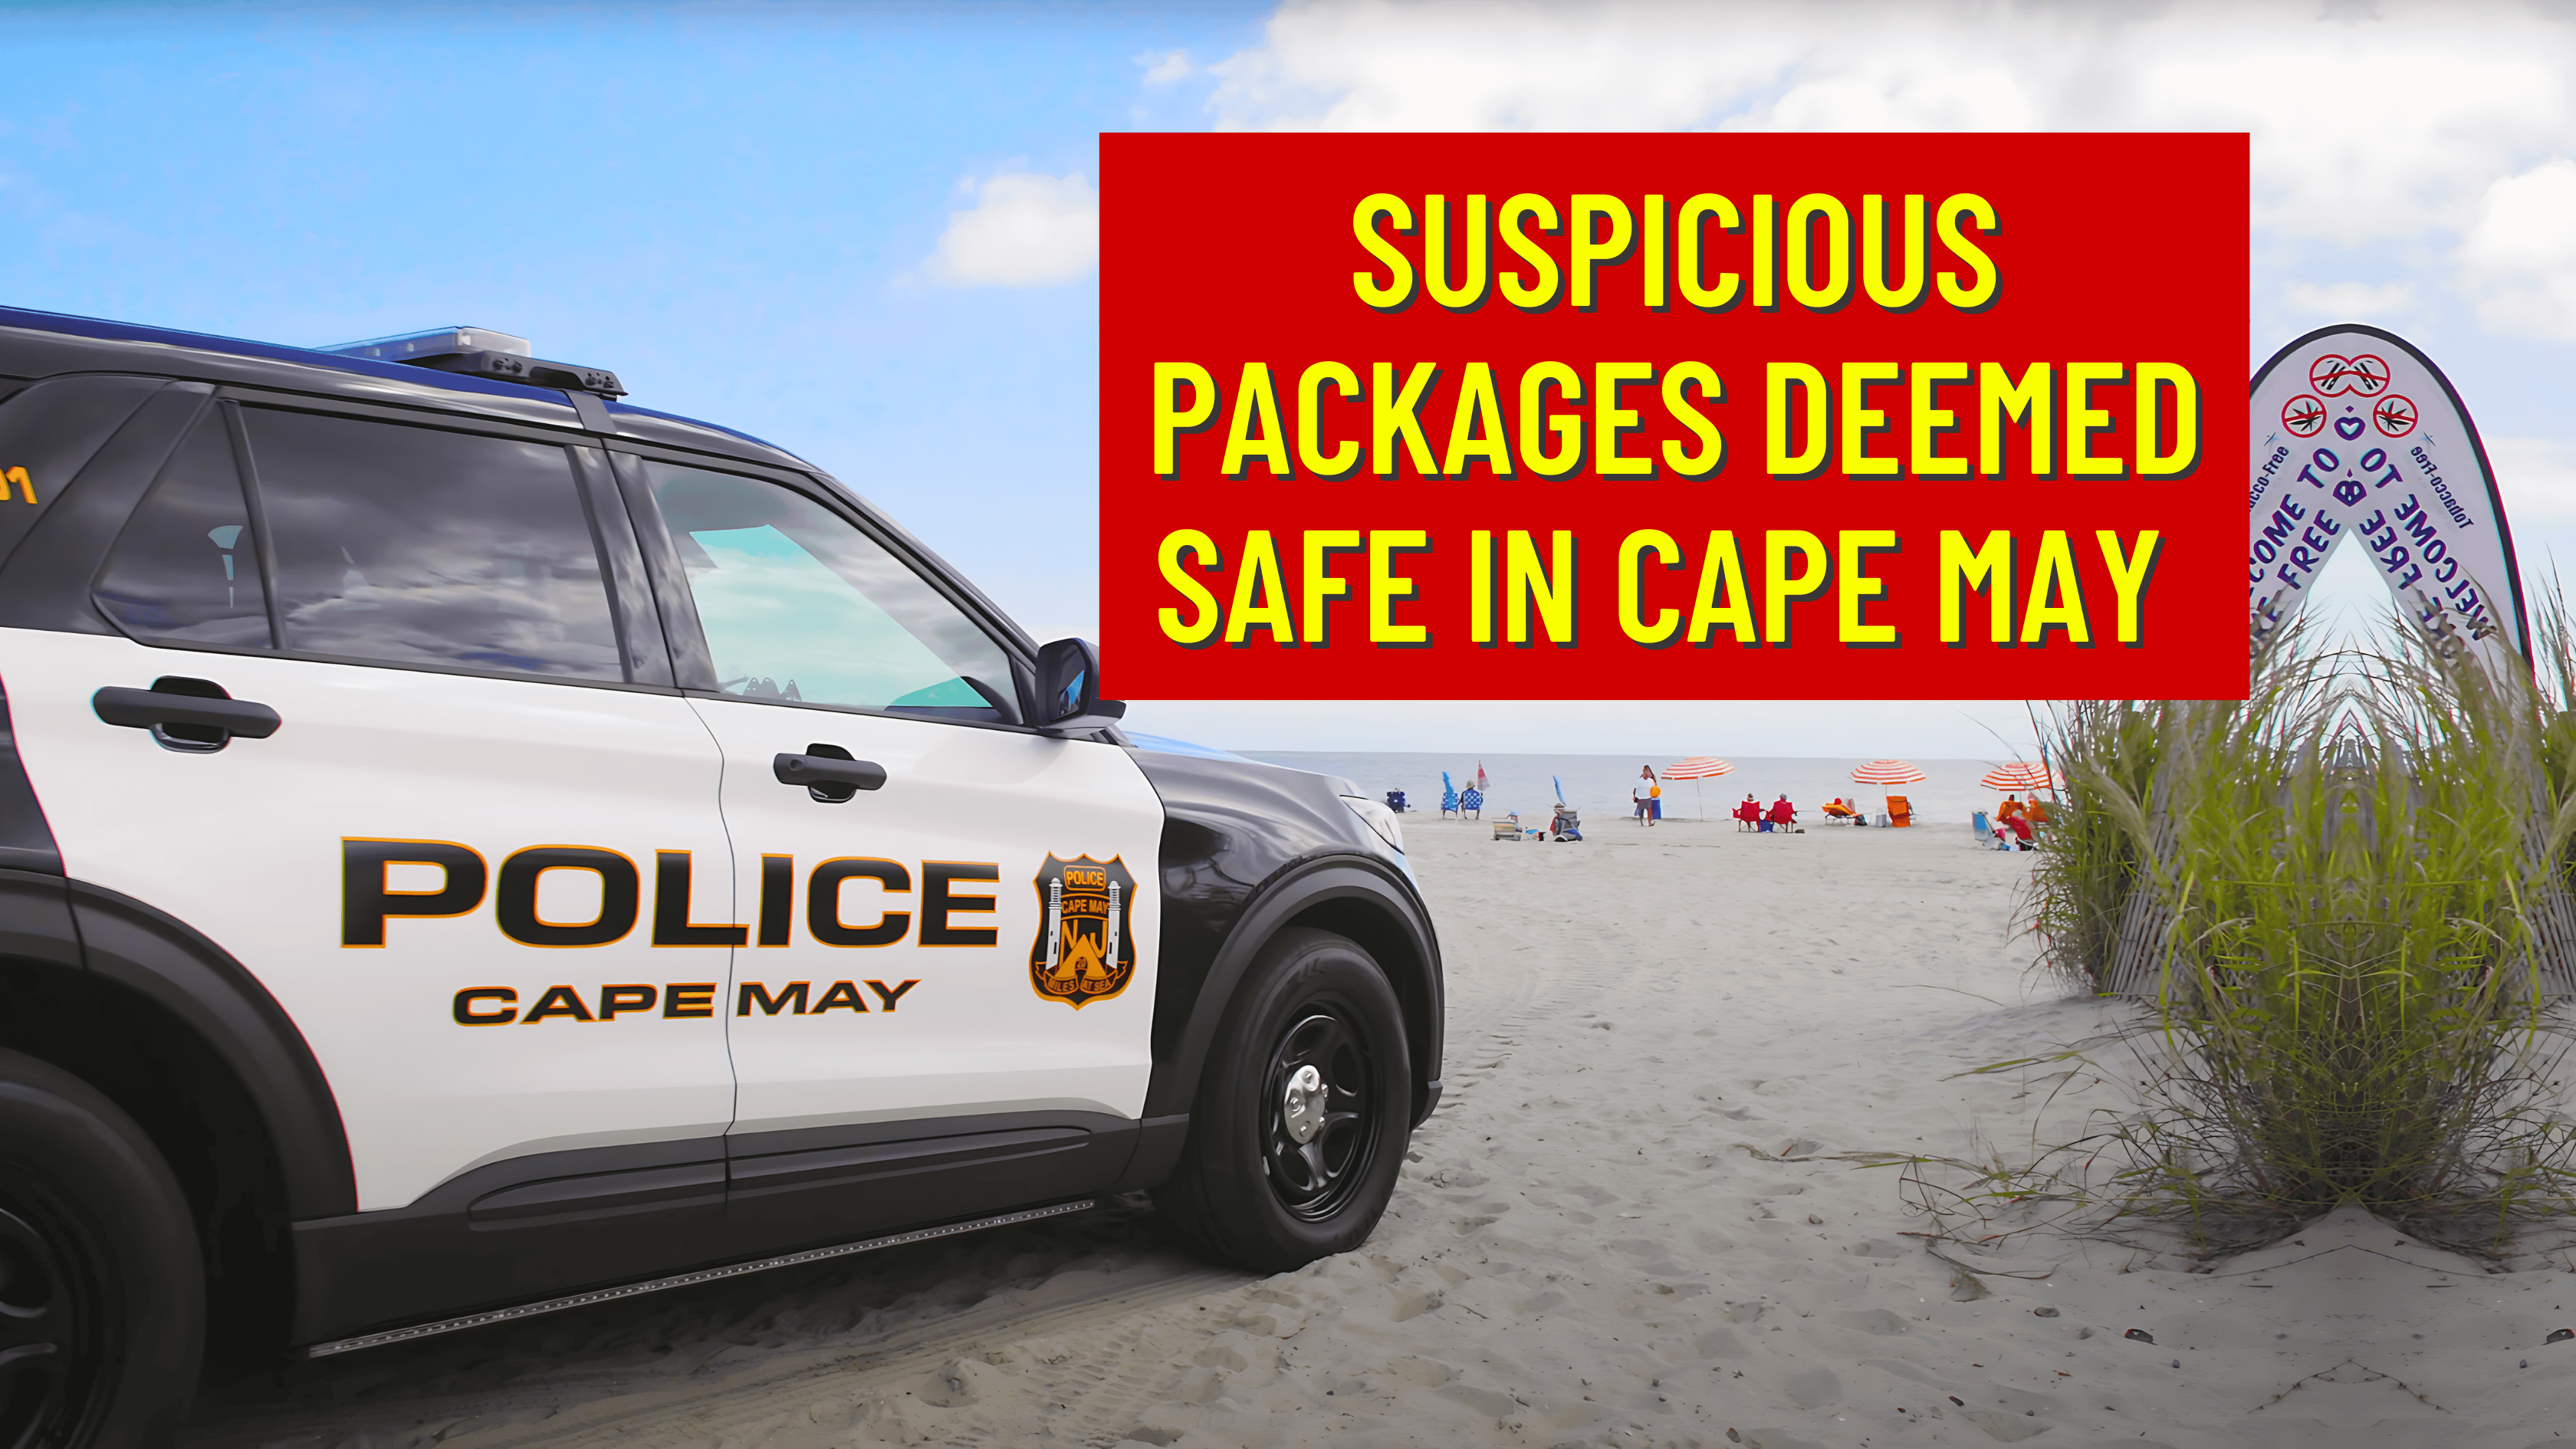 Suspicious Packages in Cape May Deemed Safe Following Extensive Investigation